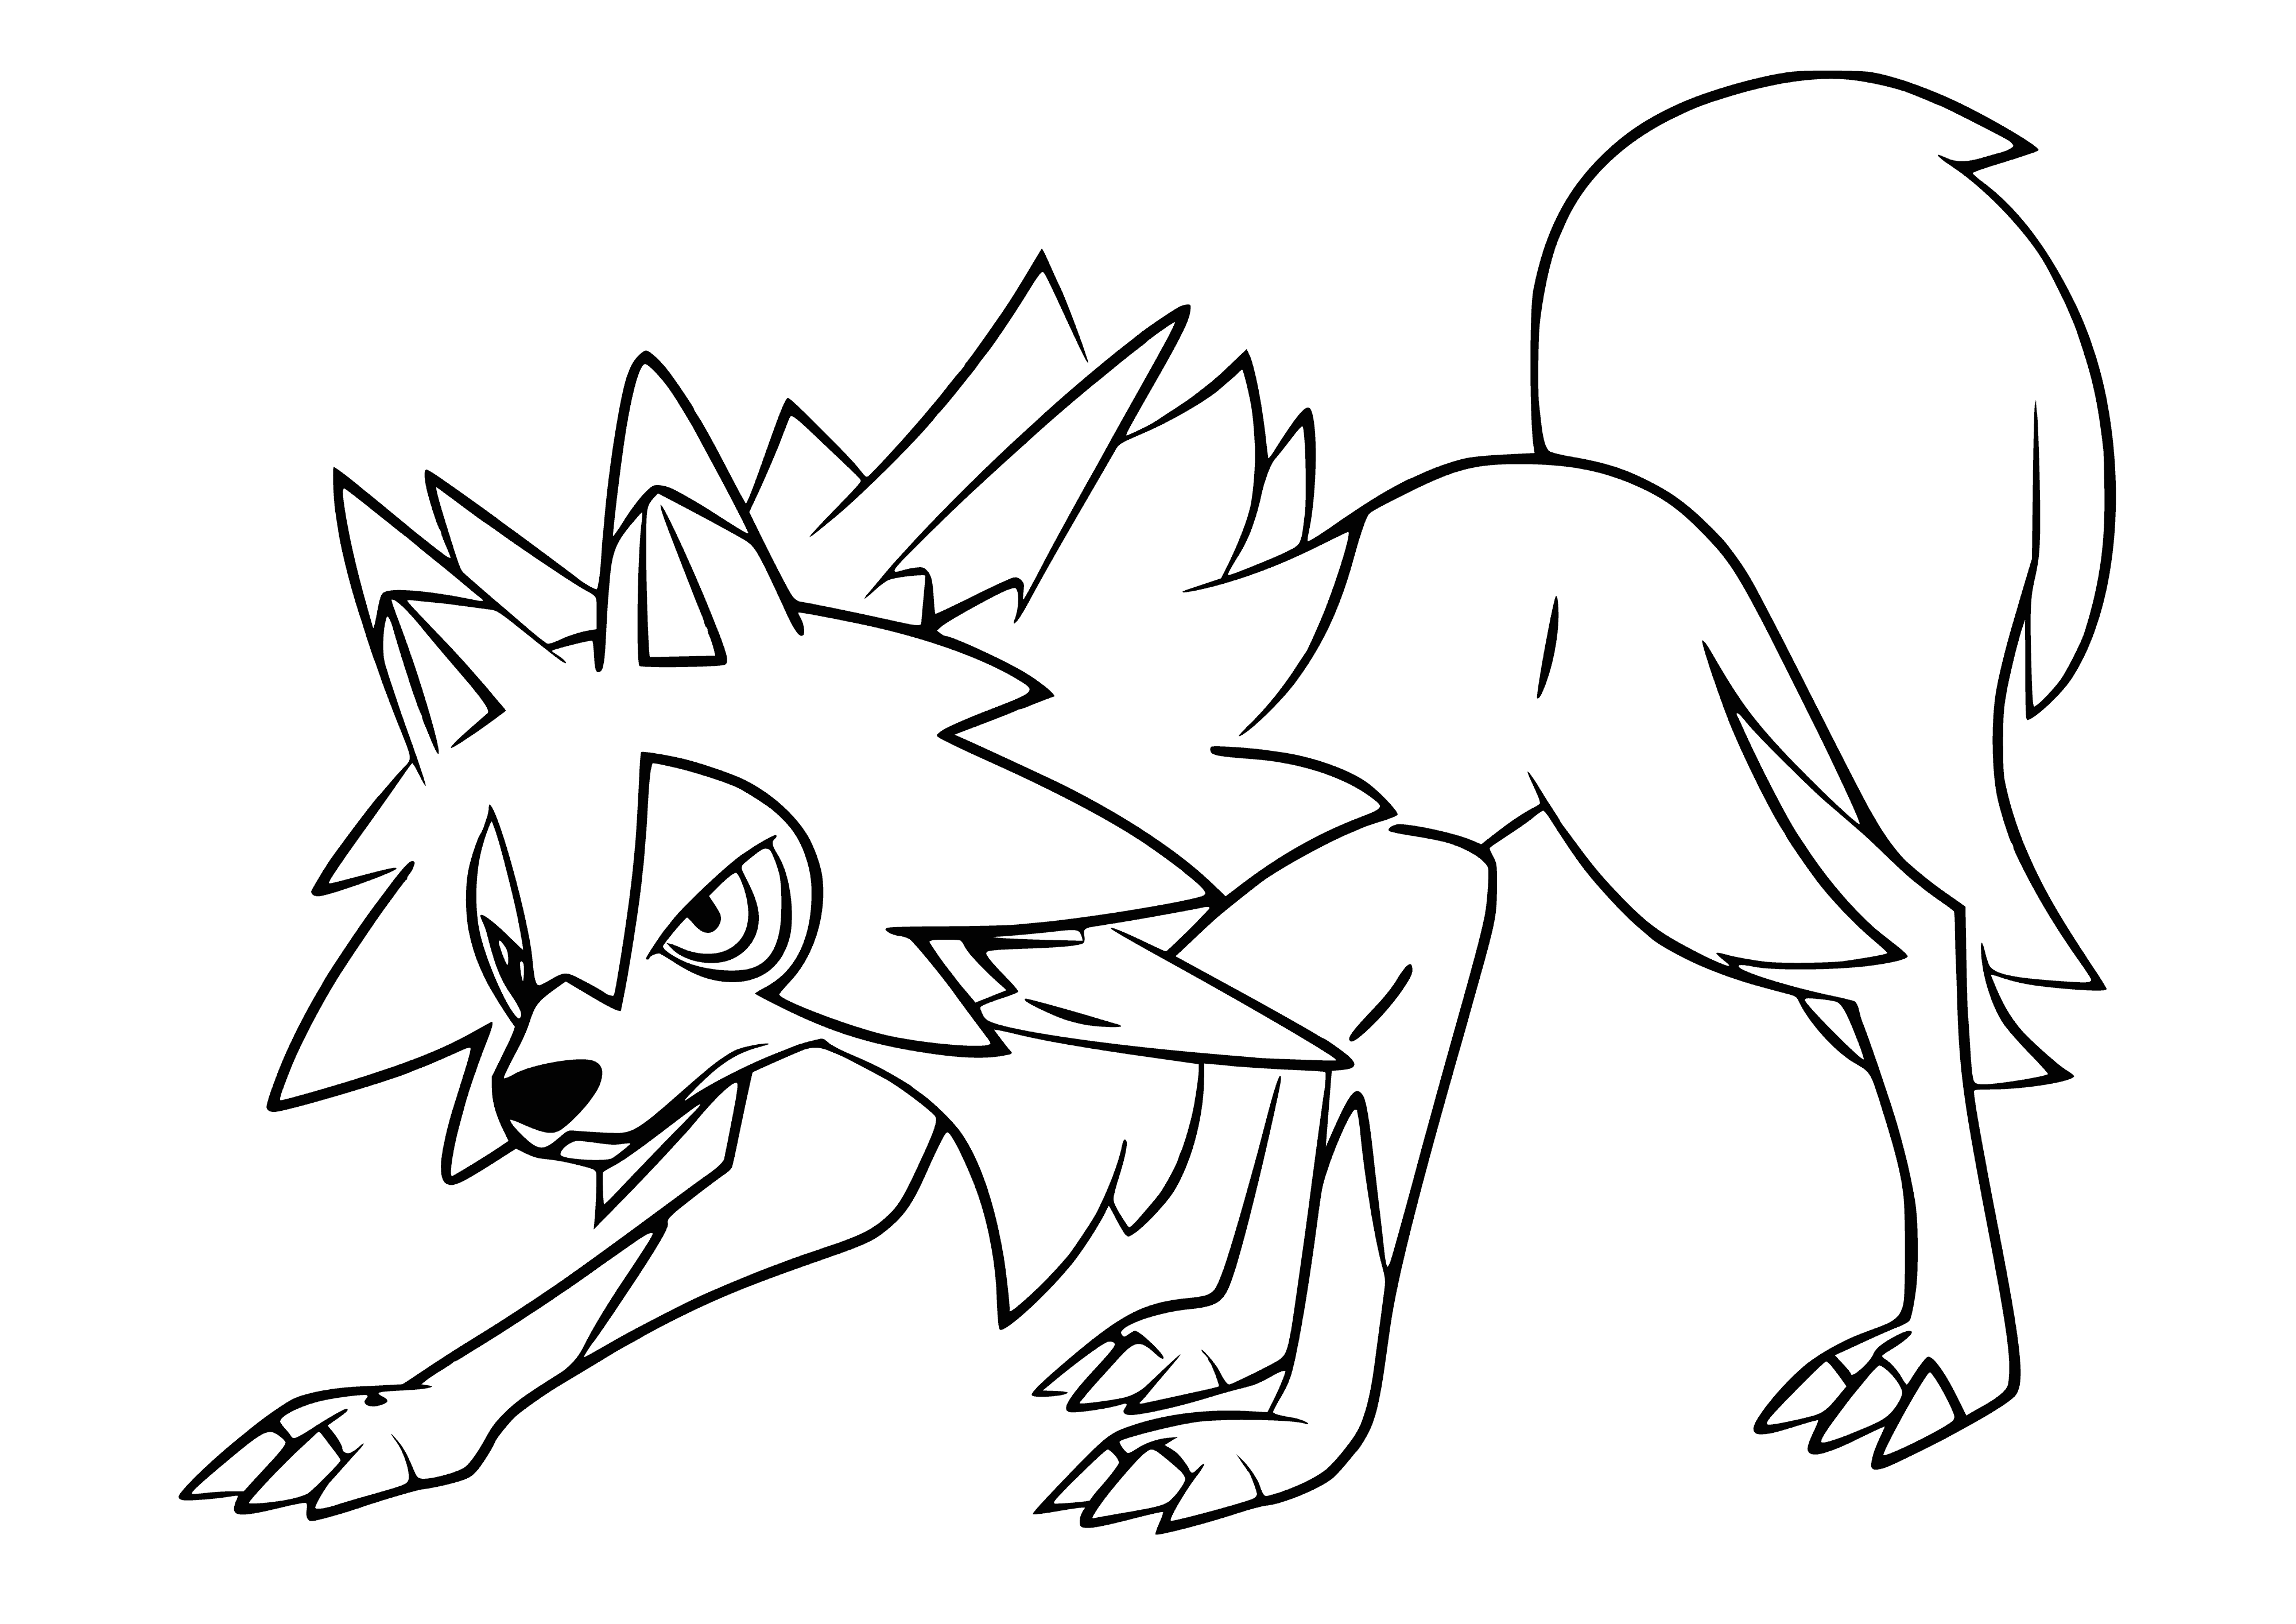 coloring page: Tan wolf-like Pokemon with white chest, yellow fur collar, yellow eyes, pointed teeth and black toes. Yellow stripes on legs, yellow tipped fluffy tail.